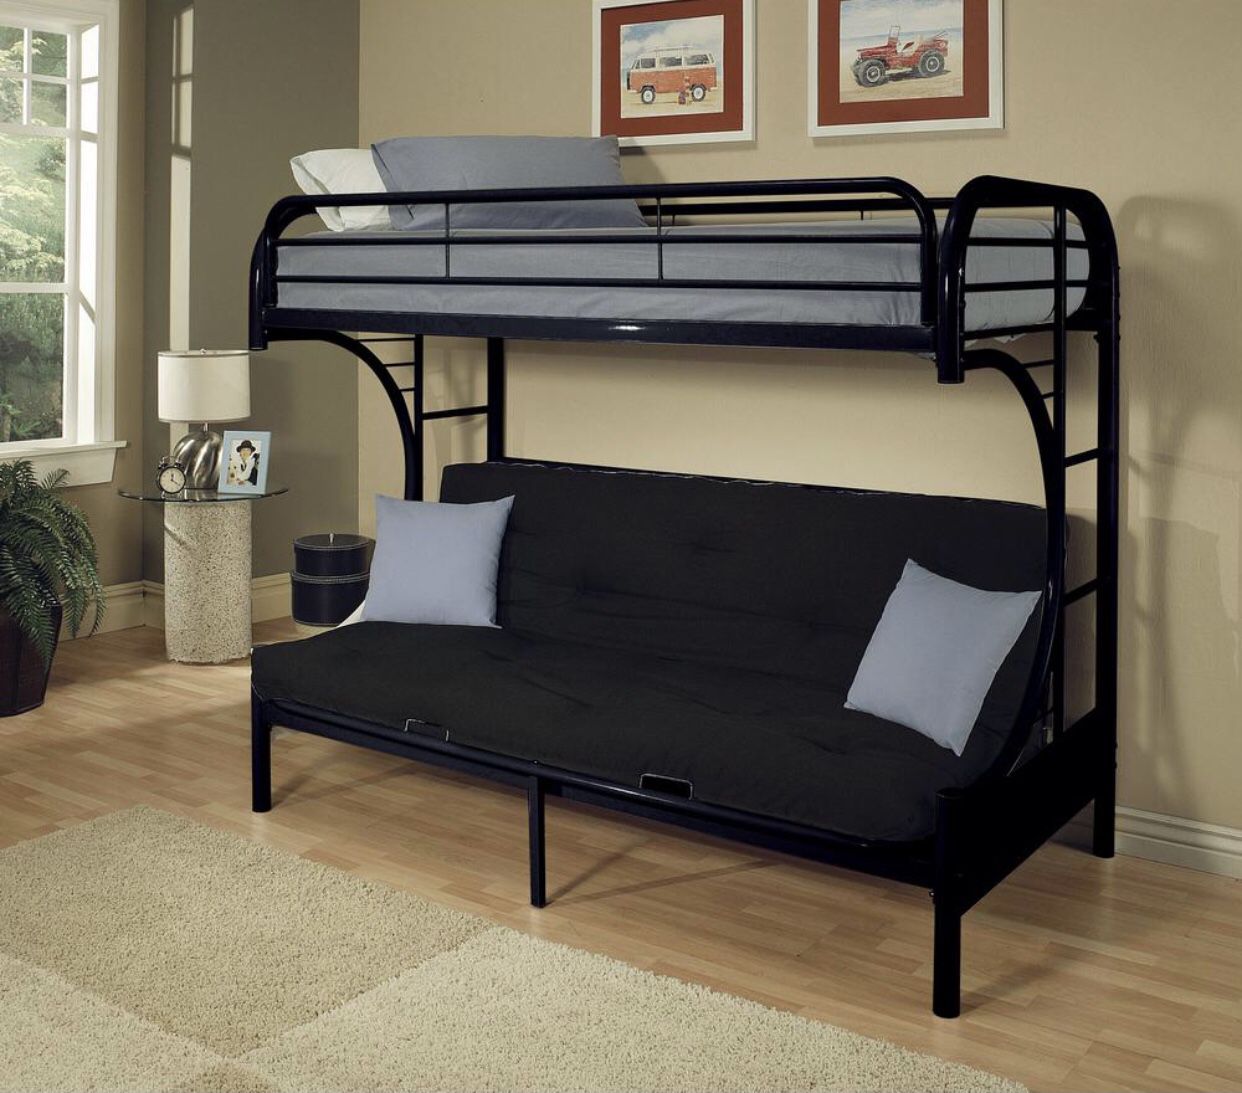 Contemporary Twin over Futon Convertible Couch and Bed with Metal Frame and ladders - Black